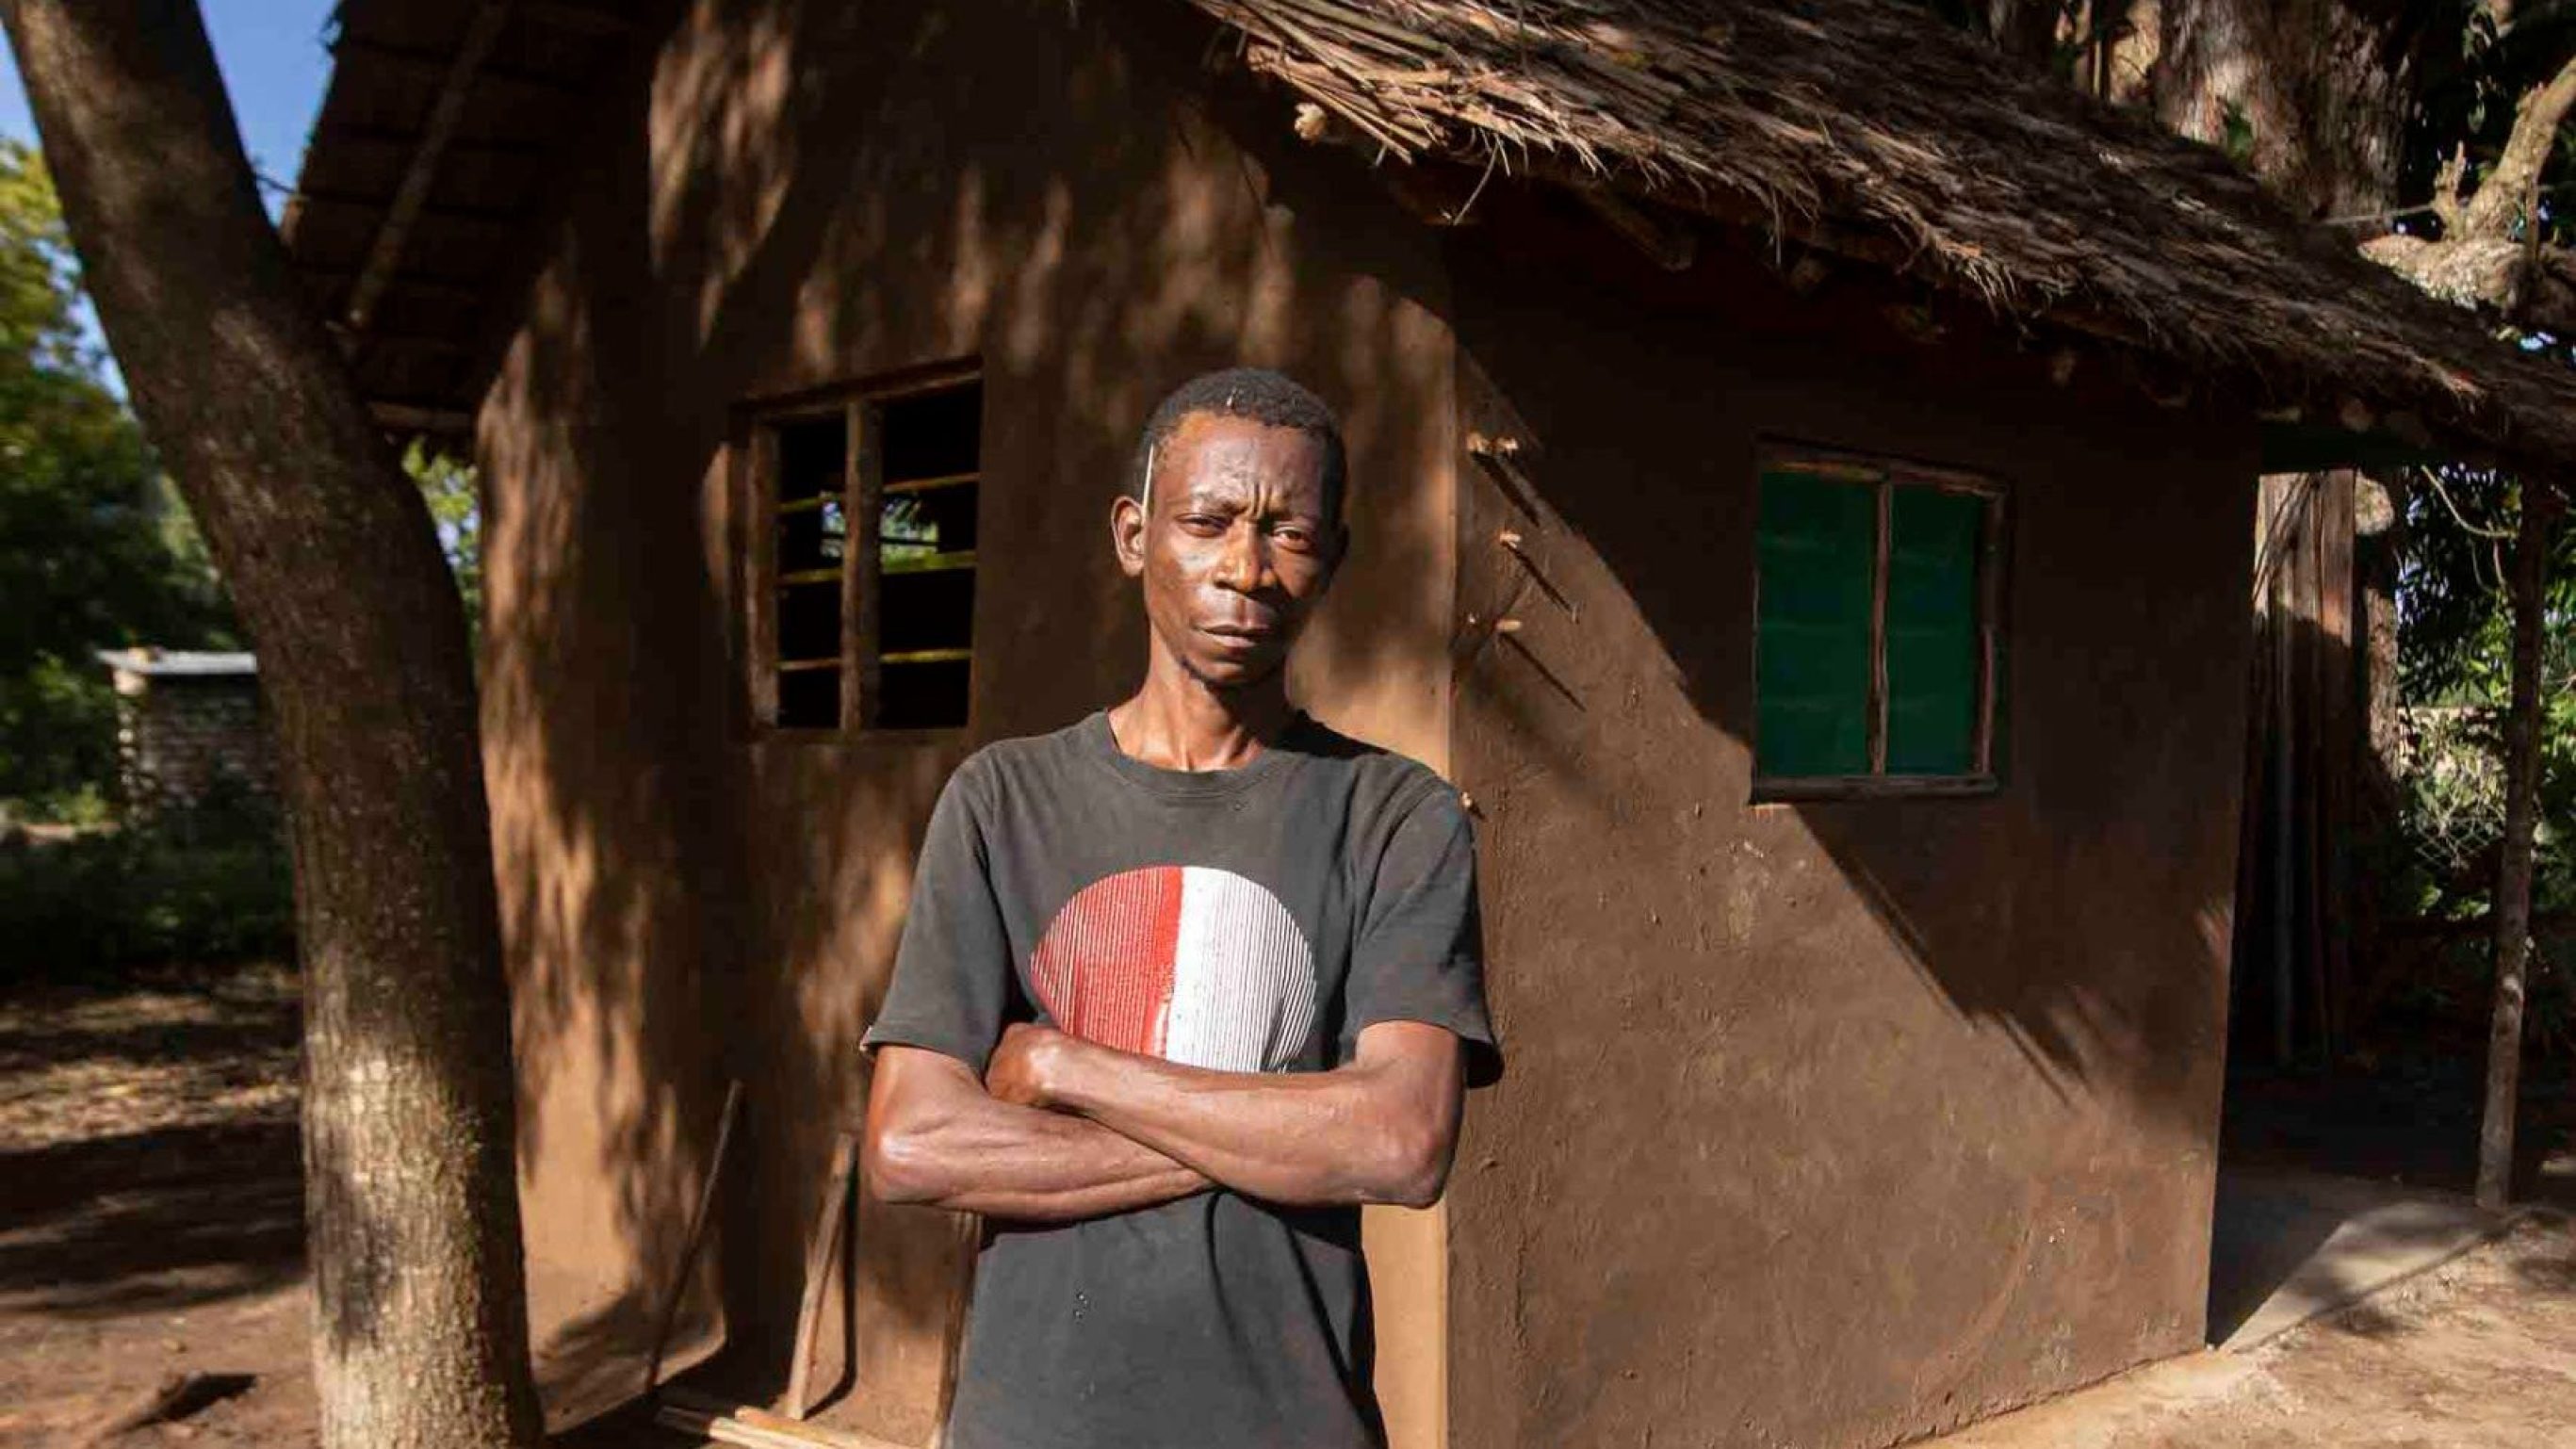 Meet Athumani Mohamed Taruma. A resident at Muhaka village in Ukunda. He built the Healthy home from scrach.